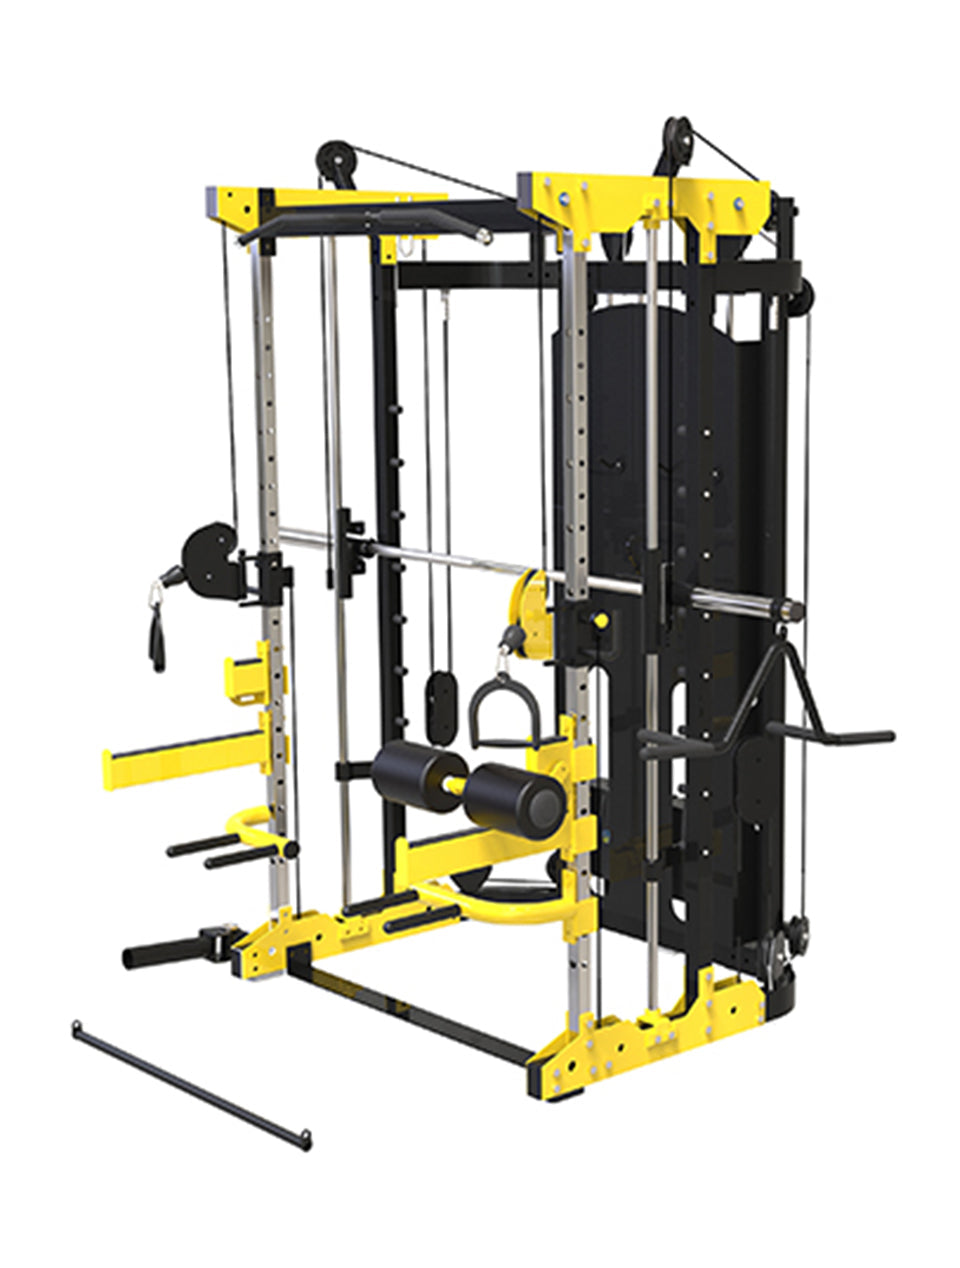 1441 Fitness Functional Trainer with Smith Machine and Squat Rack - 41FA3108